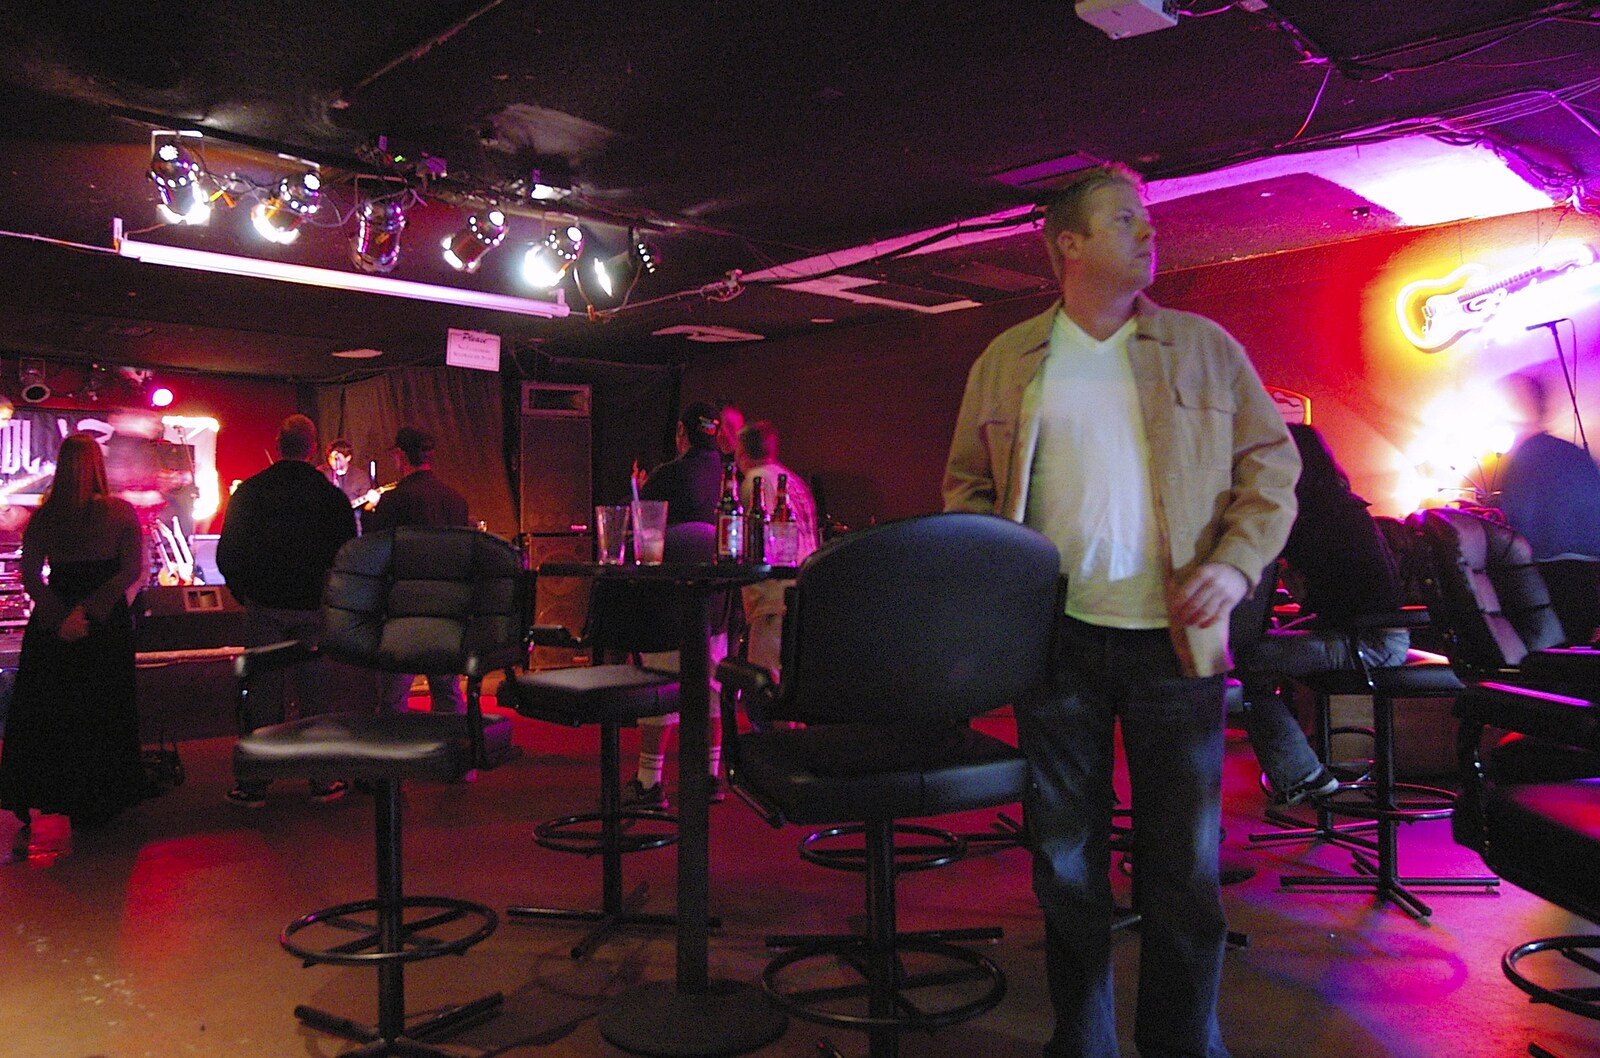 Life in a San Diego bar from Cruisin' Route 101, San Diego to Capistrano, California - 4th March 2006